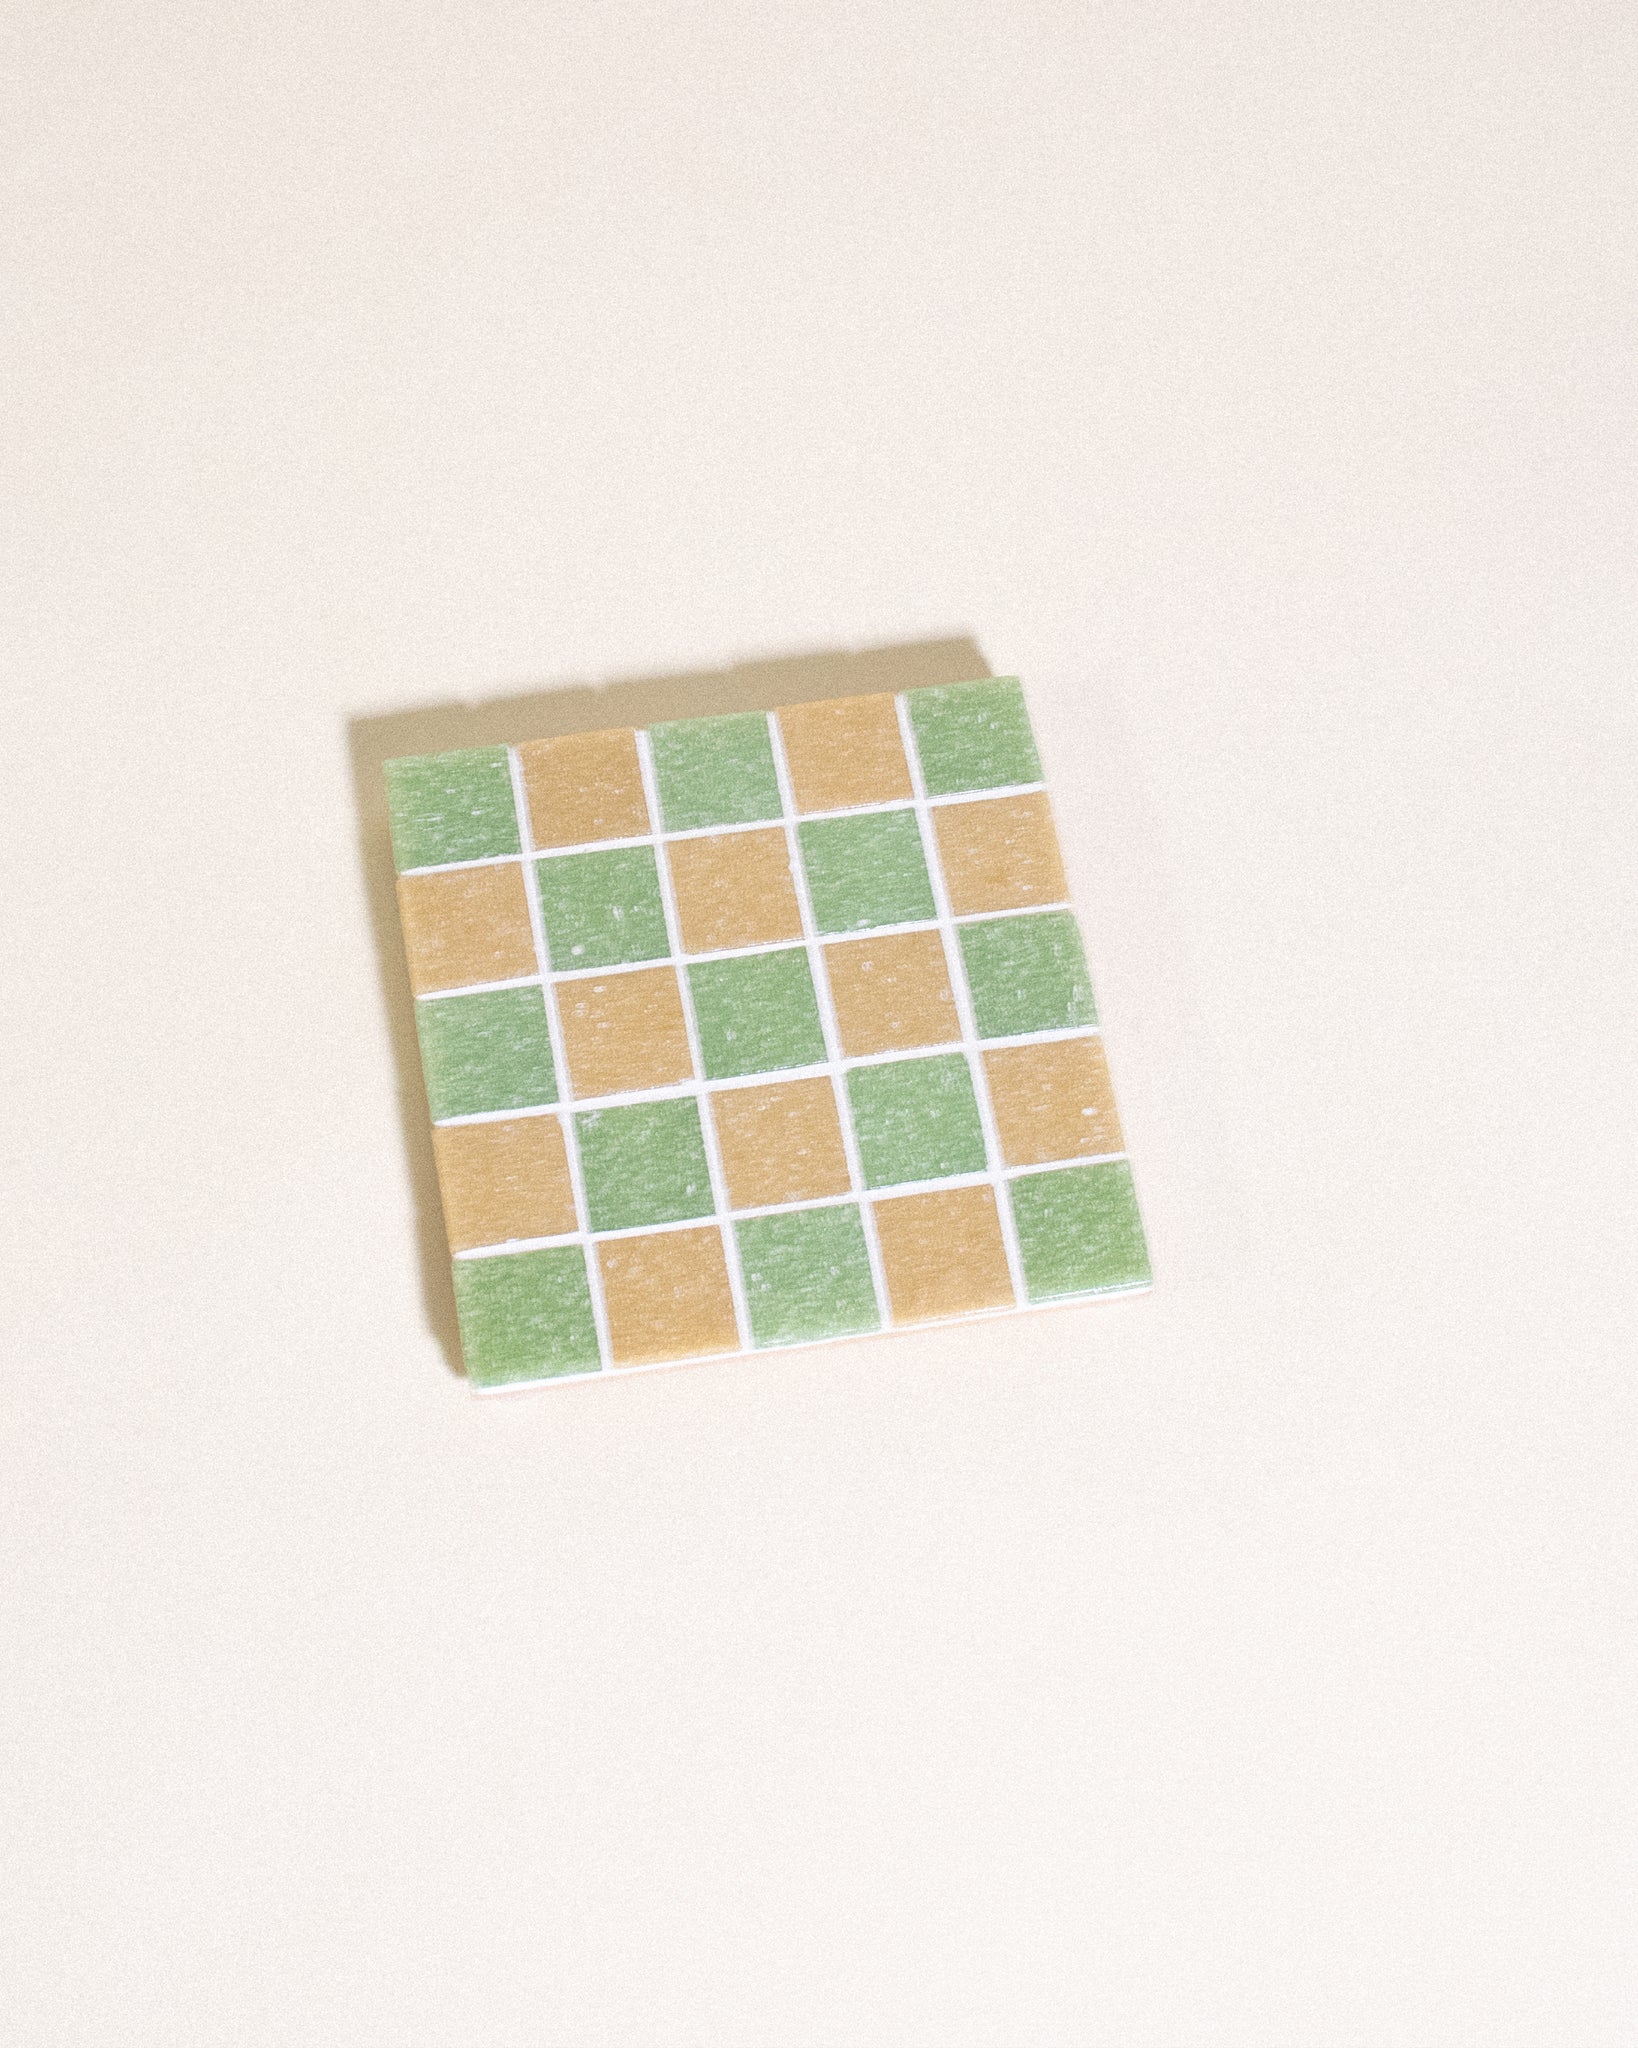 GLASS TILE COASTER - Sour Patch Candy - 14